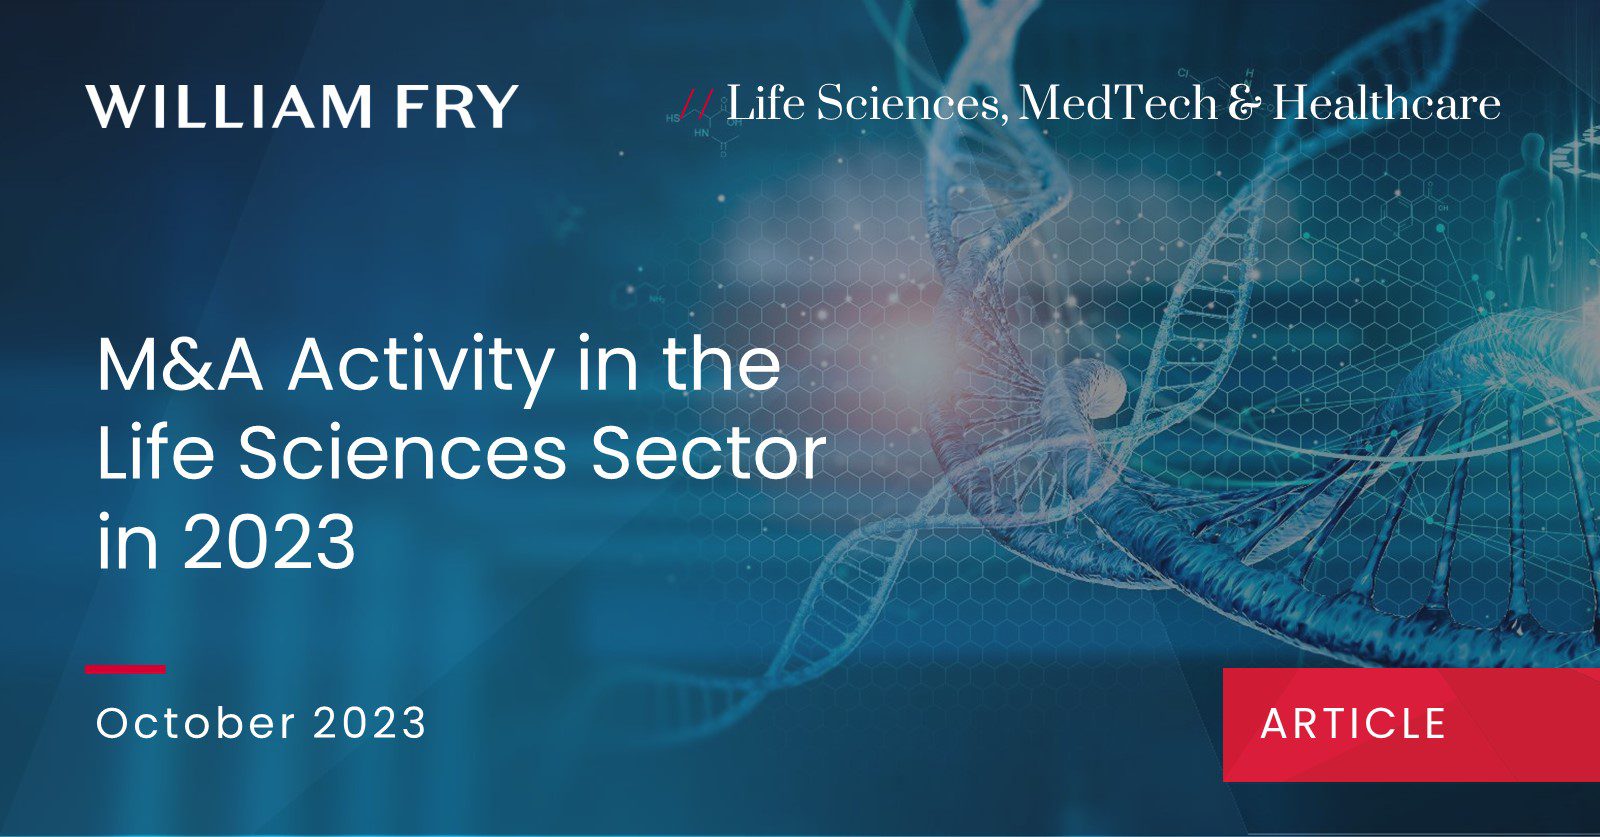 M&A Activity in the Life Sciences Sector in 2023